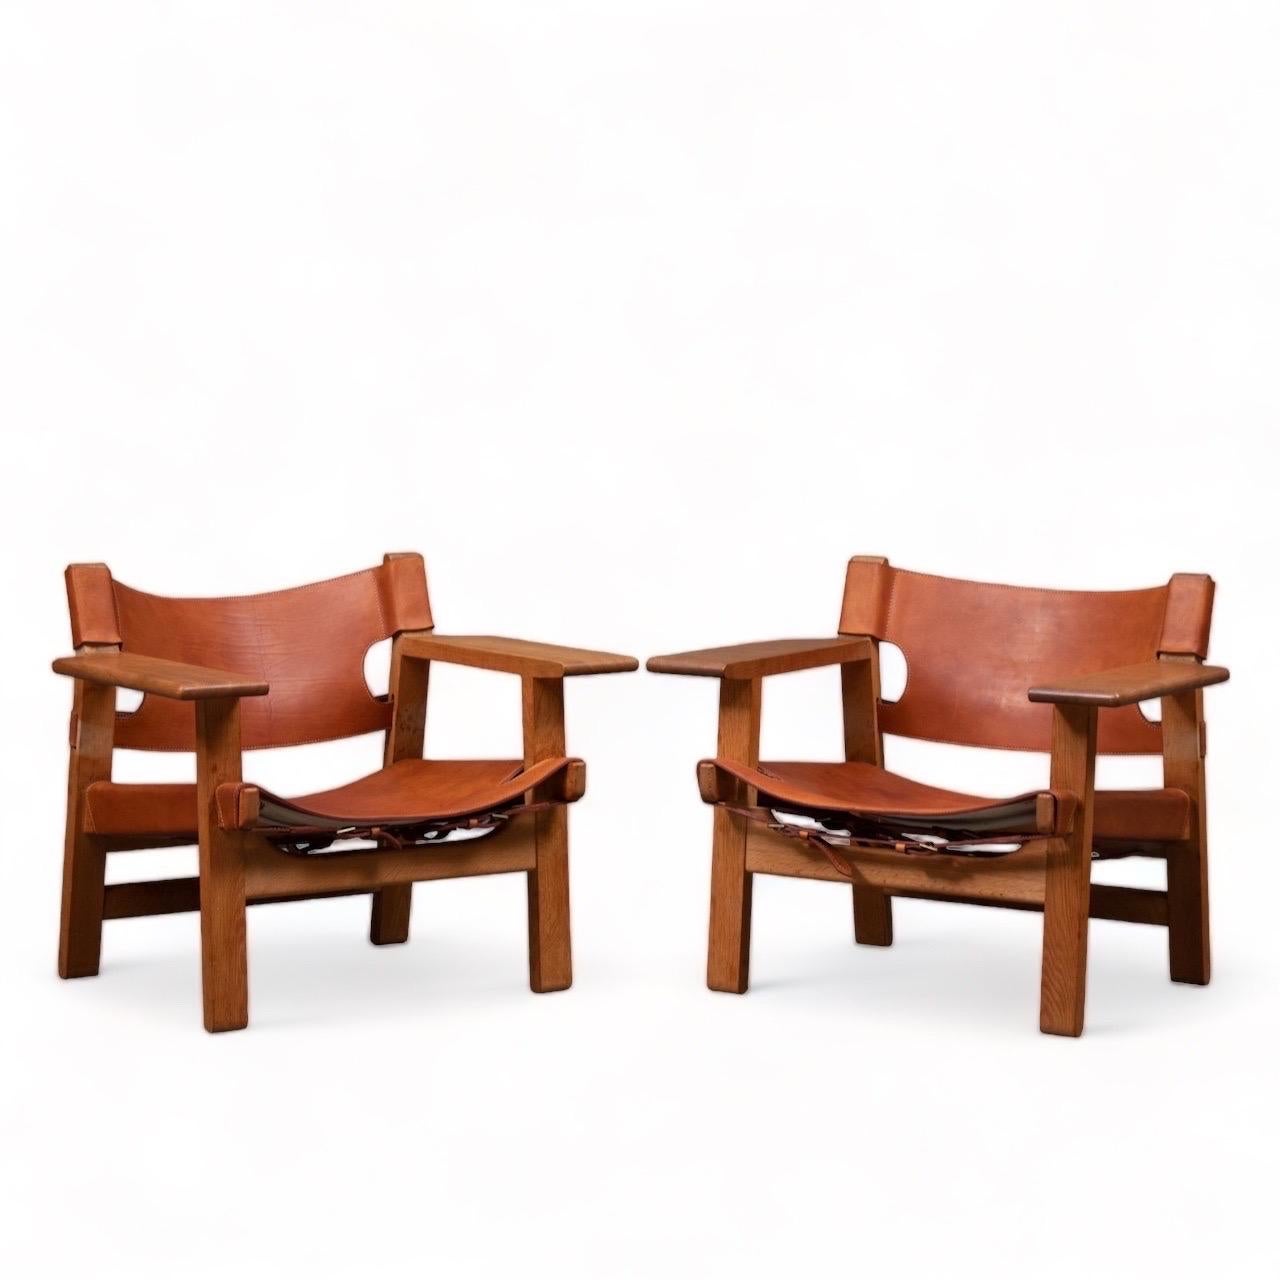 Mid-Century Modern Pair of Spanish Chairs by Børge Mogensen, 1960s For Sale